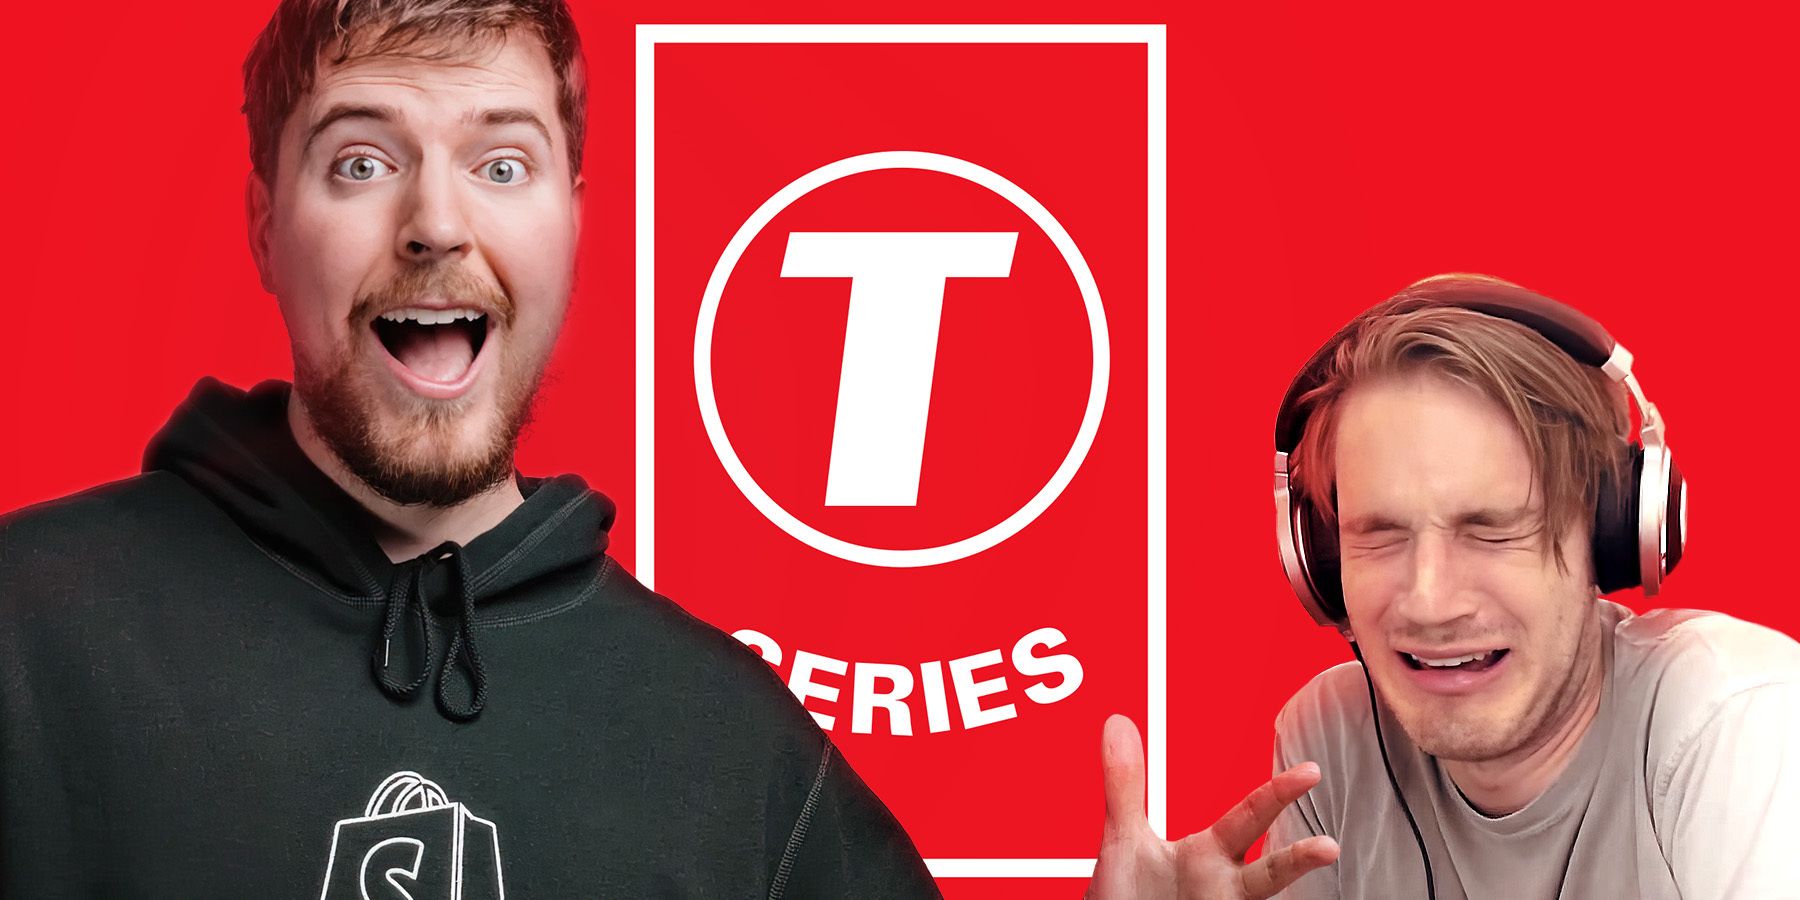 MrBeast Wants to Avenge PewDiePie by Overtaking T-Series   Subscriptions